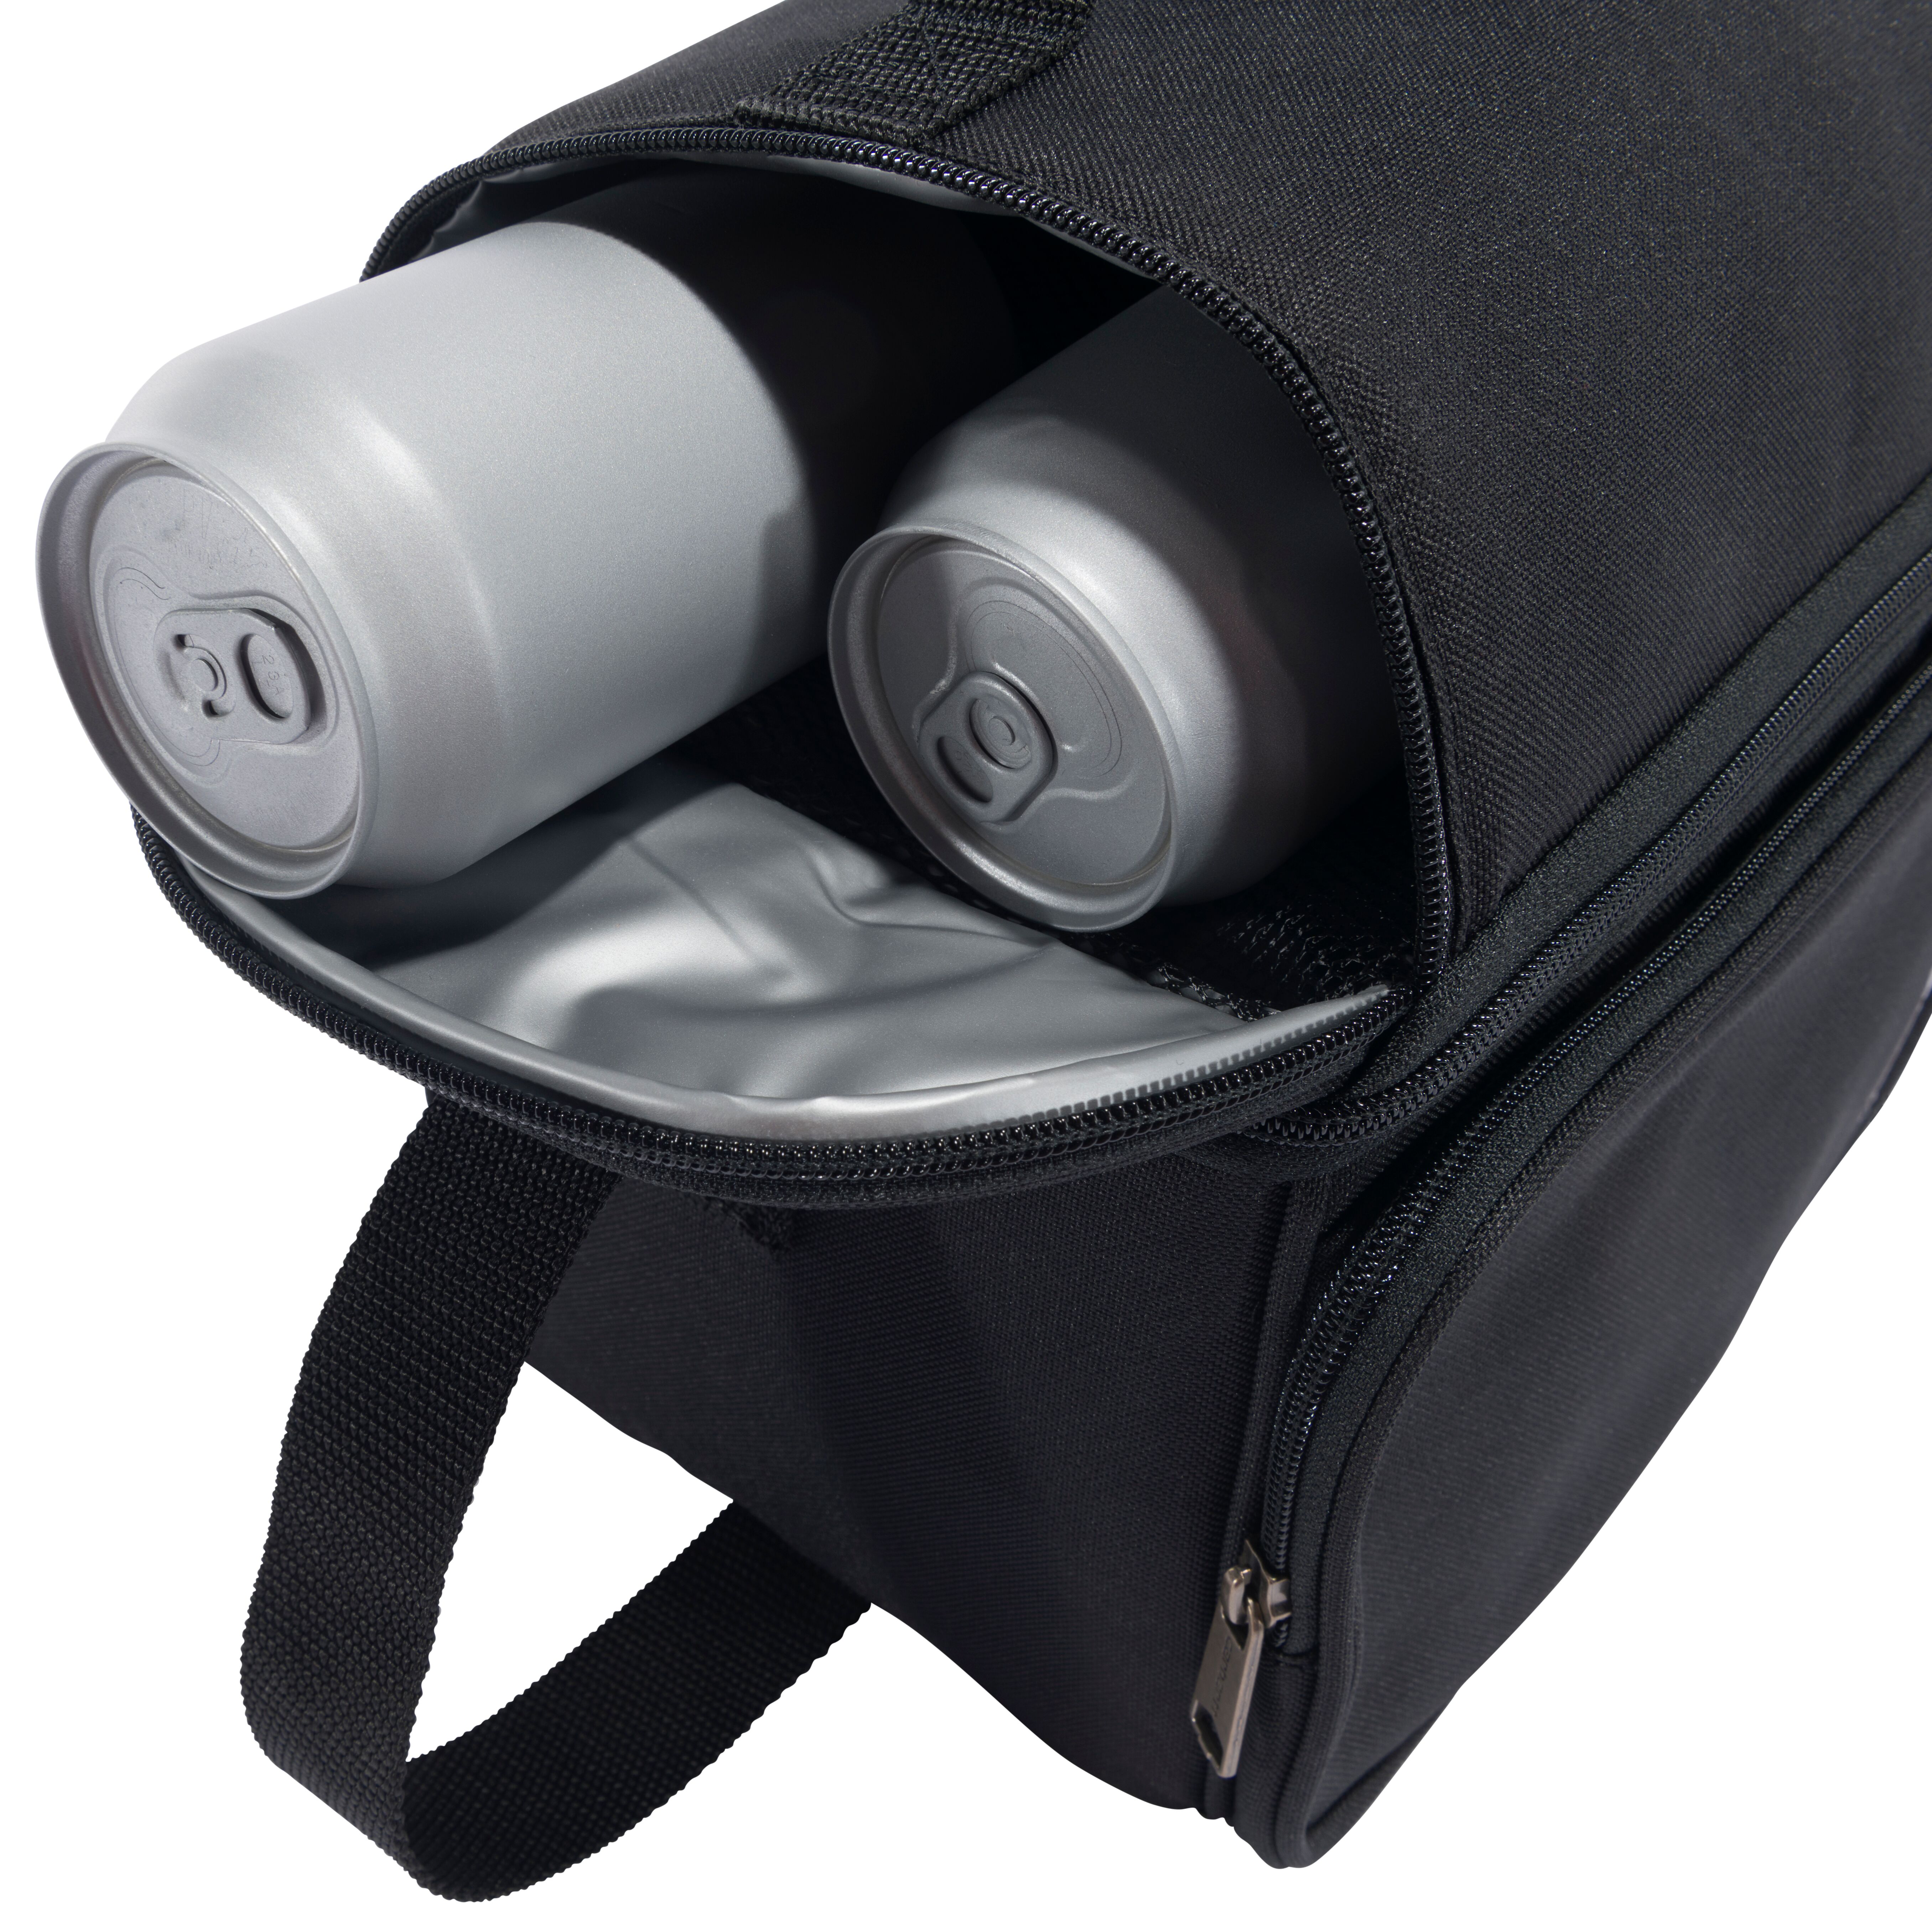 Deluxe Dual Compartment Insulated Lunch Cooler Bag